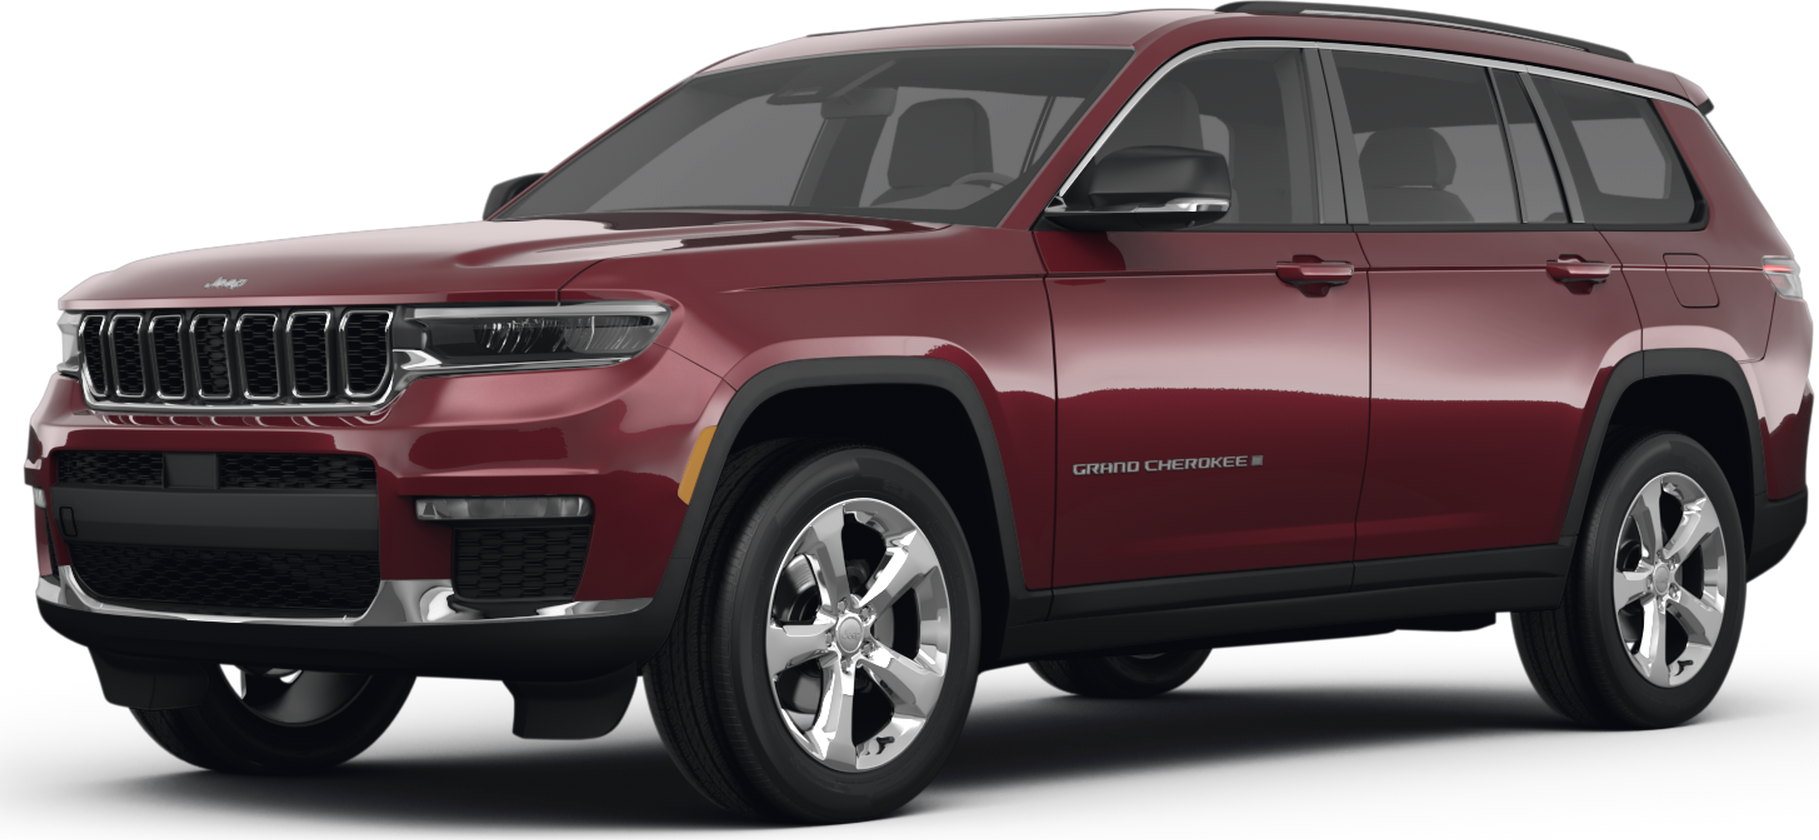 2021 Jeep Grand Cherokee L Summit Reserve Review